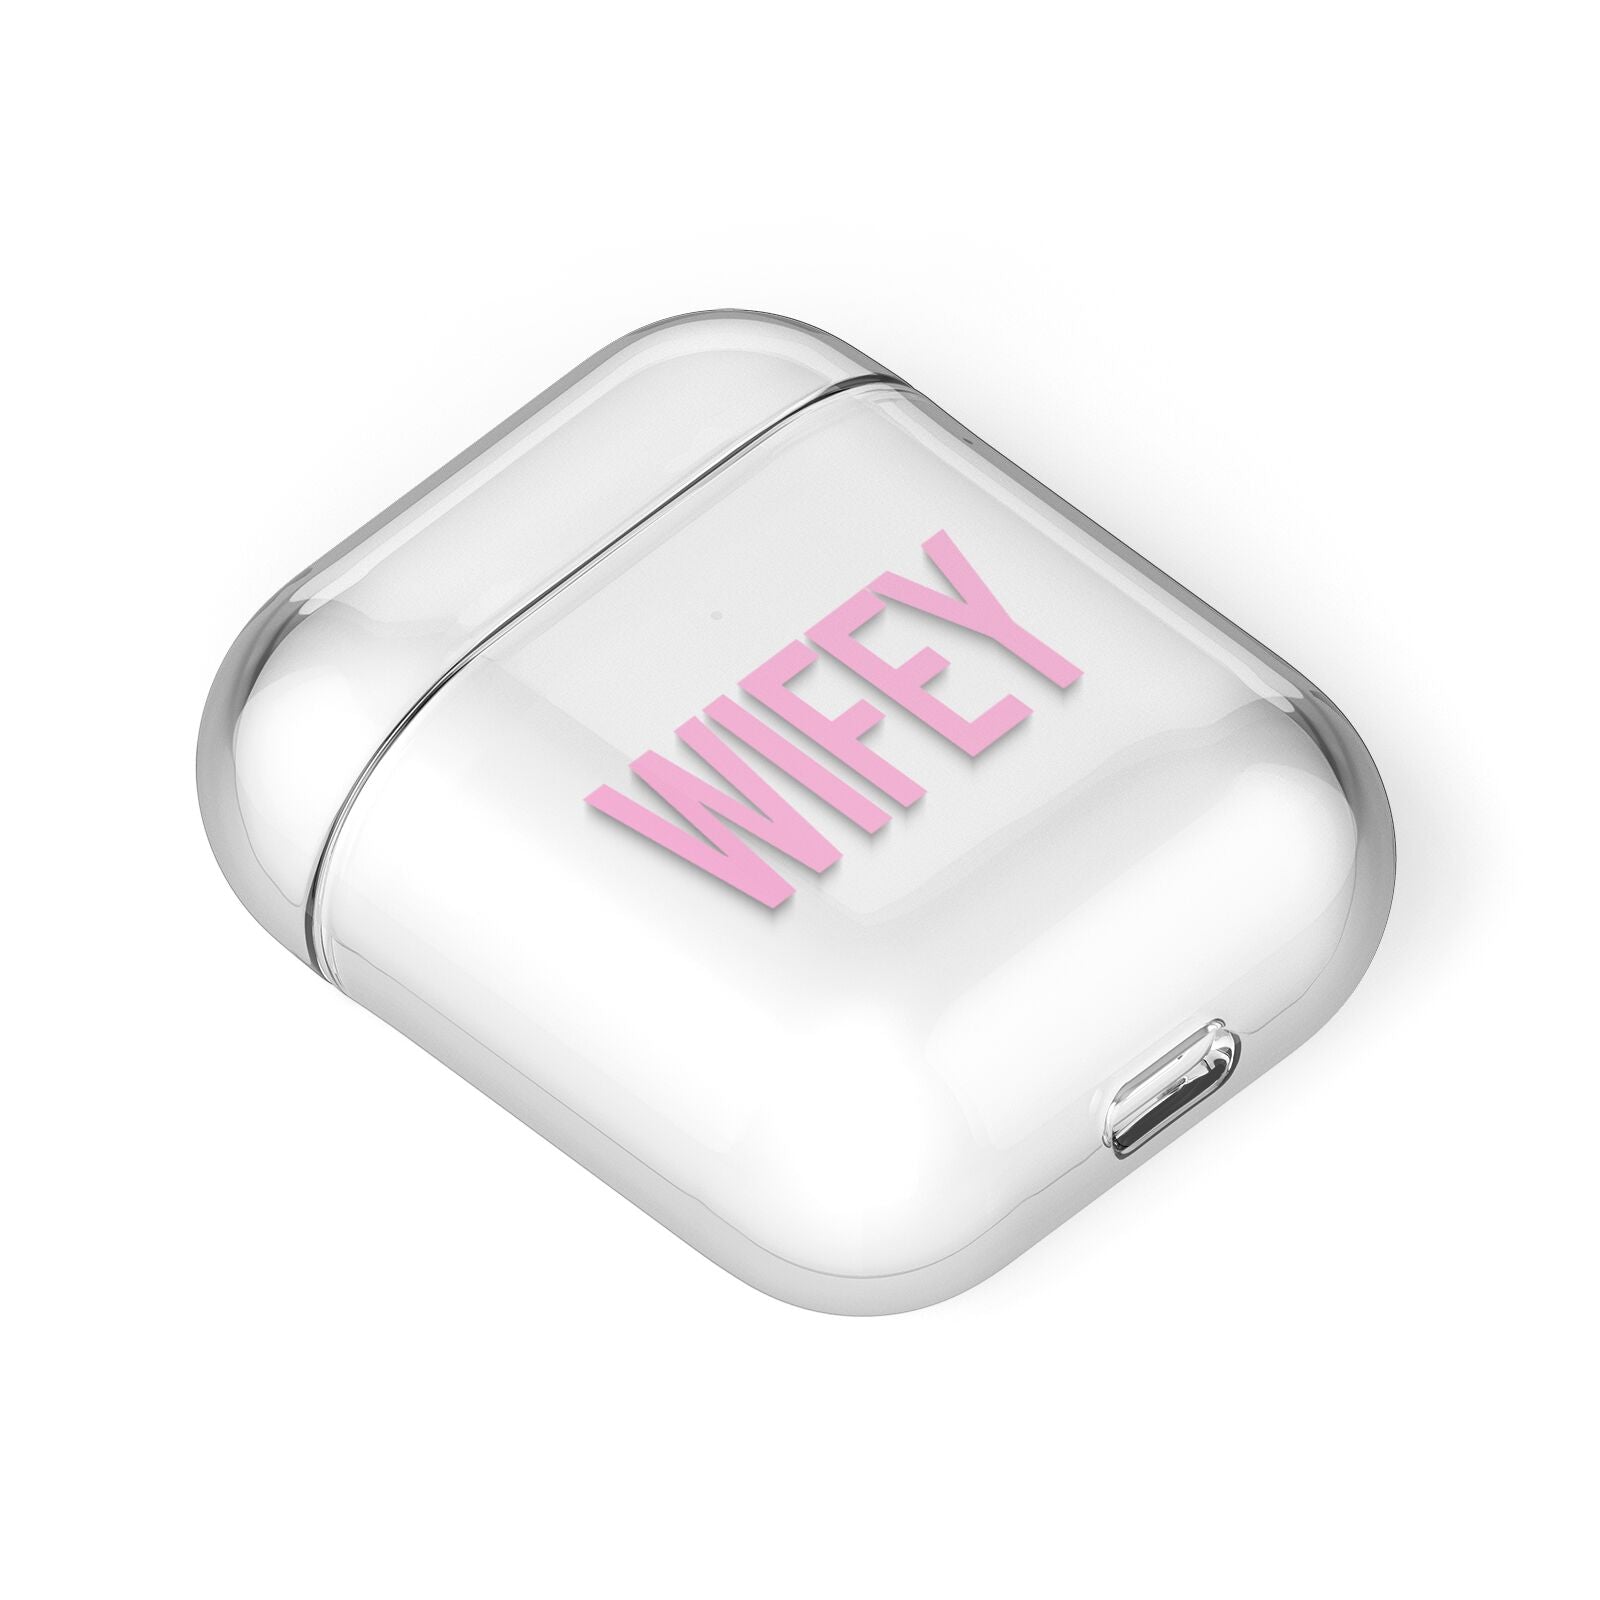 Wifey Pink AirPods Case Laid Flat